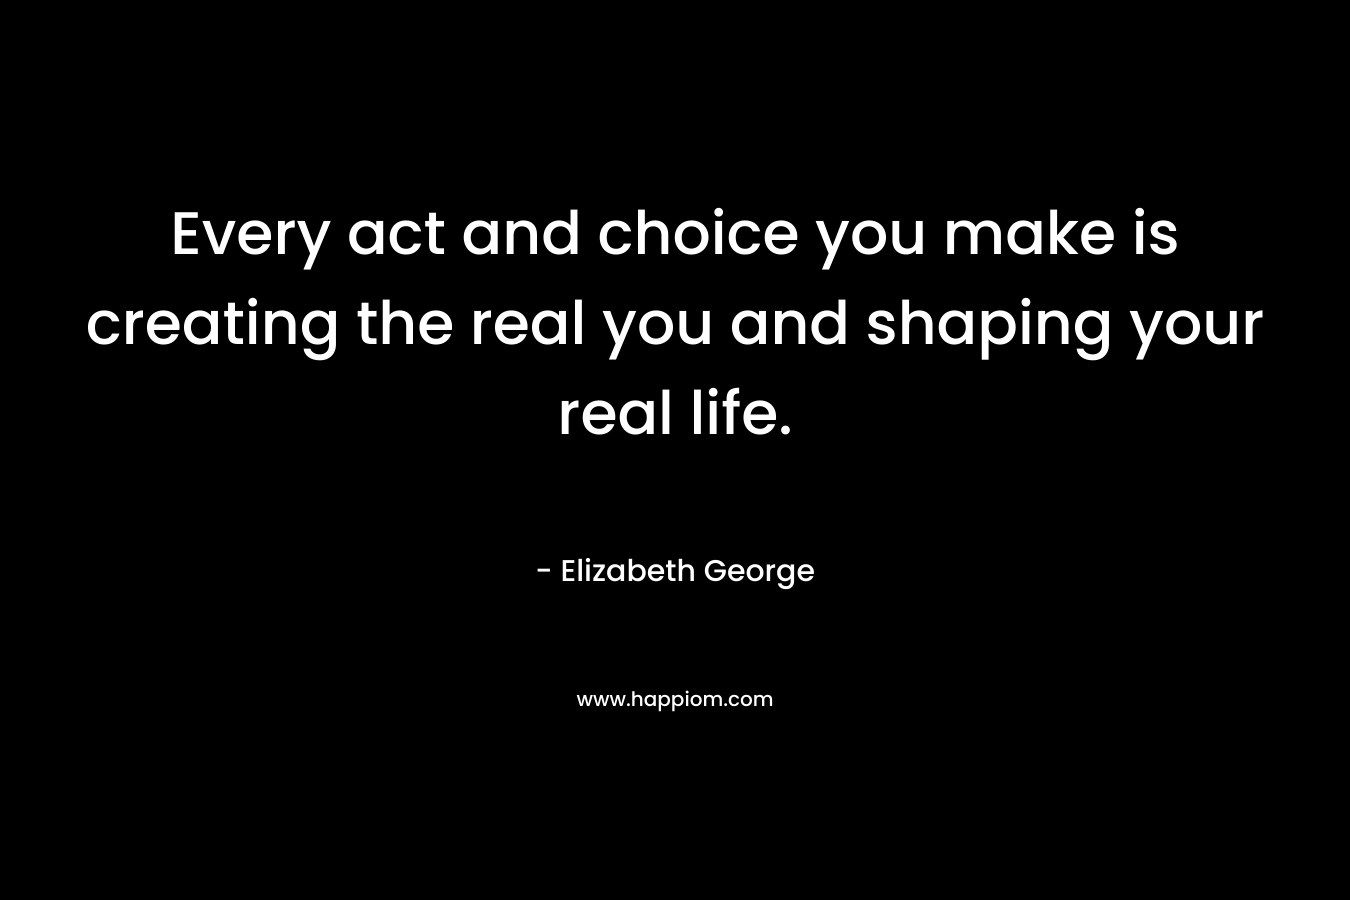 Every act and choice you make is creating the real you and shaping your real life.